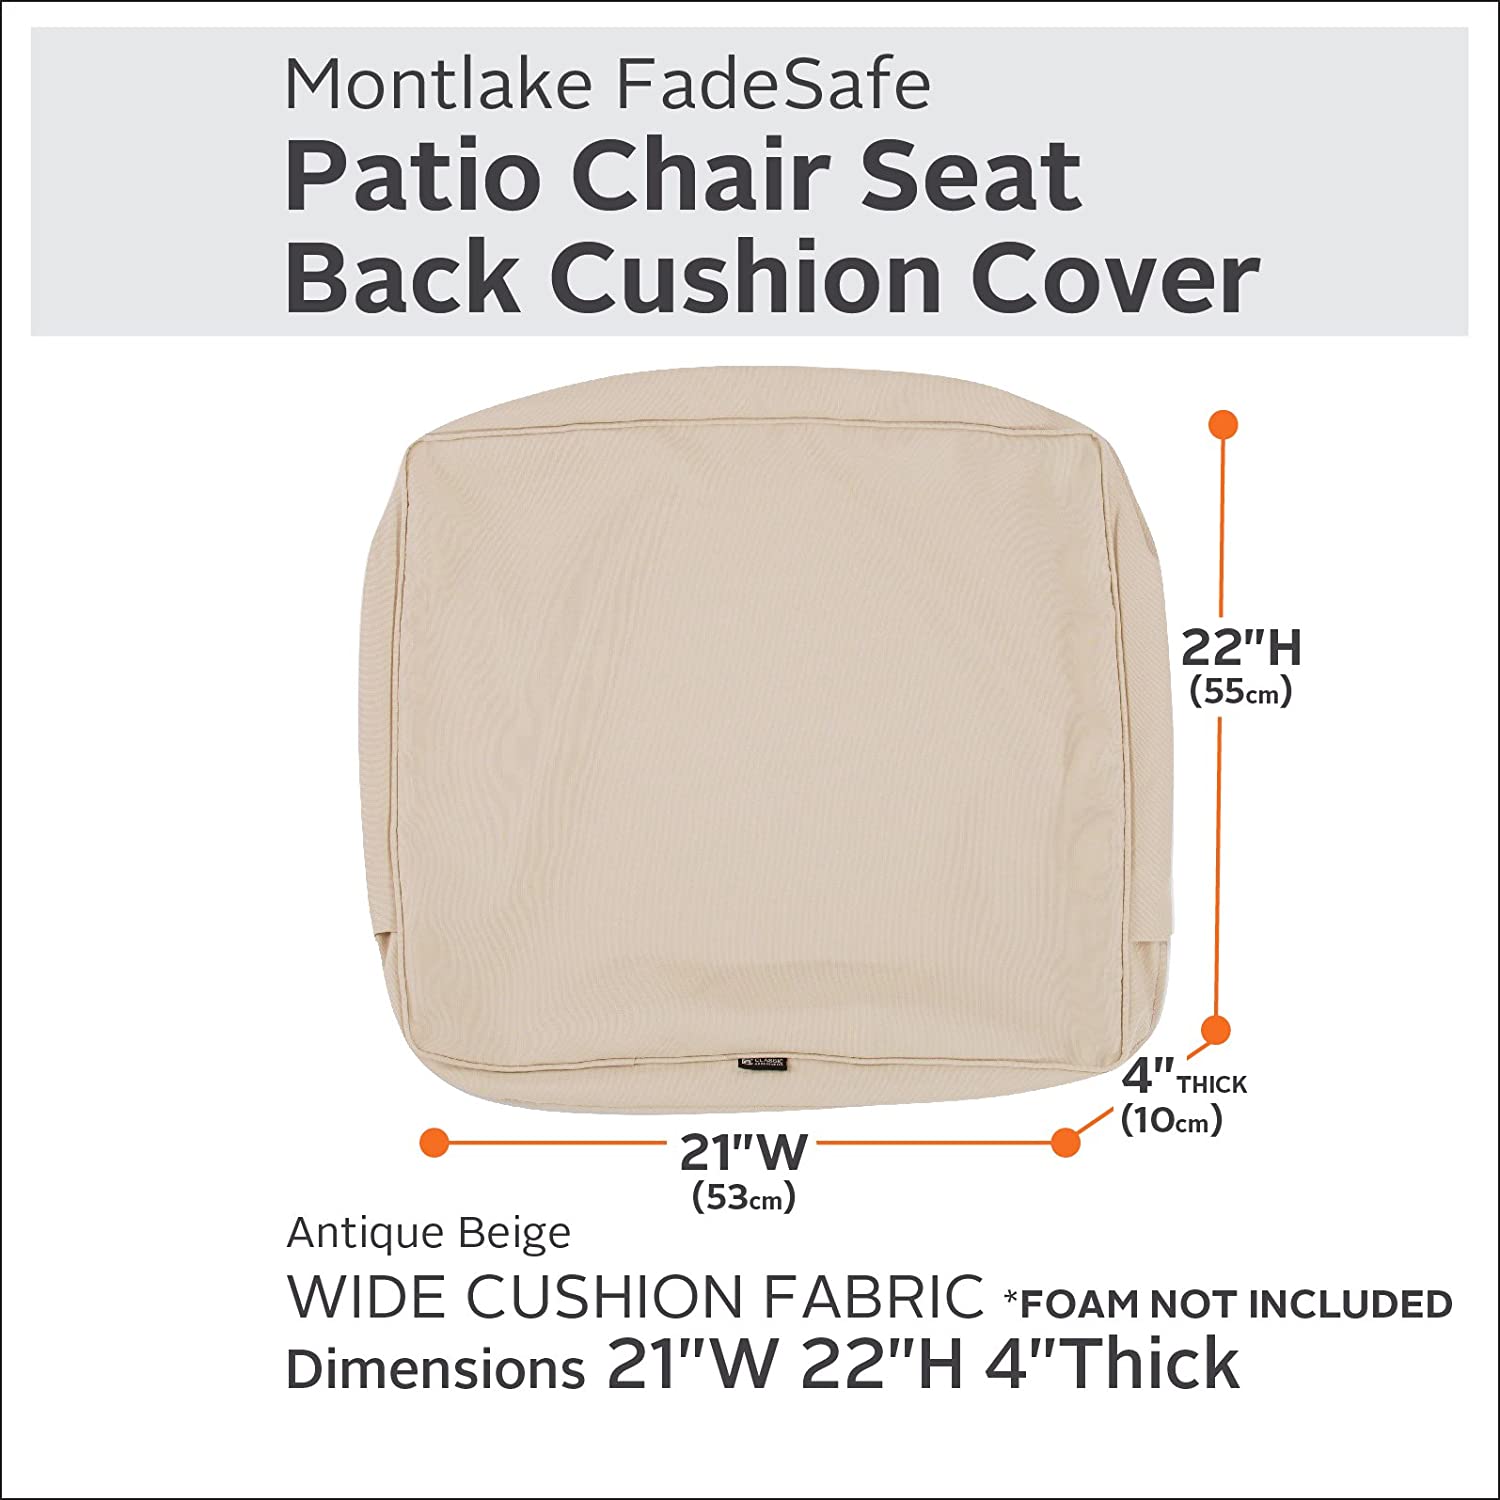 Classic Accessories Montlake Water-Resistant 21 x 22 x 4 Inch Outdoor Back Cushion Slip Cover, Patio Furniture Cushion Cover, Antique Beige